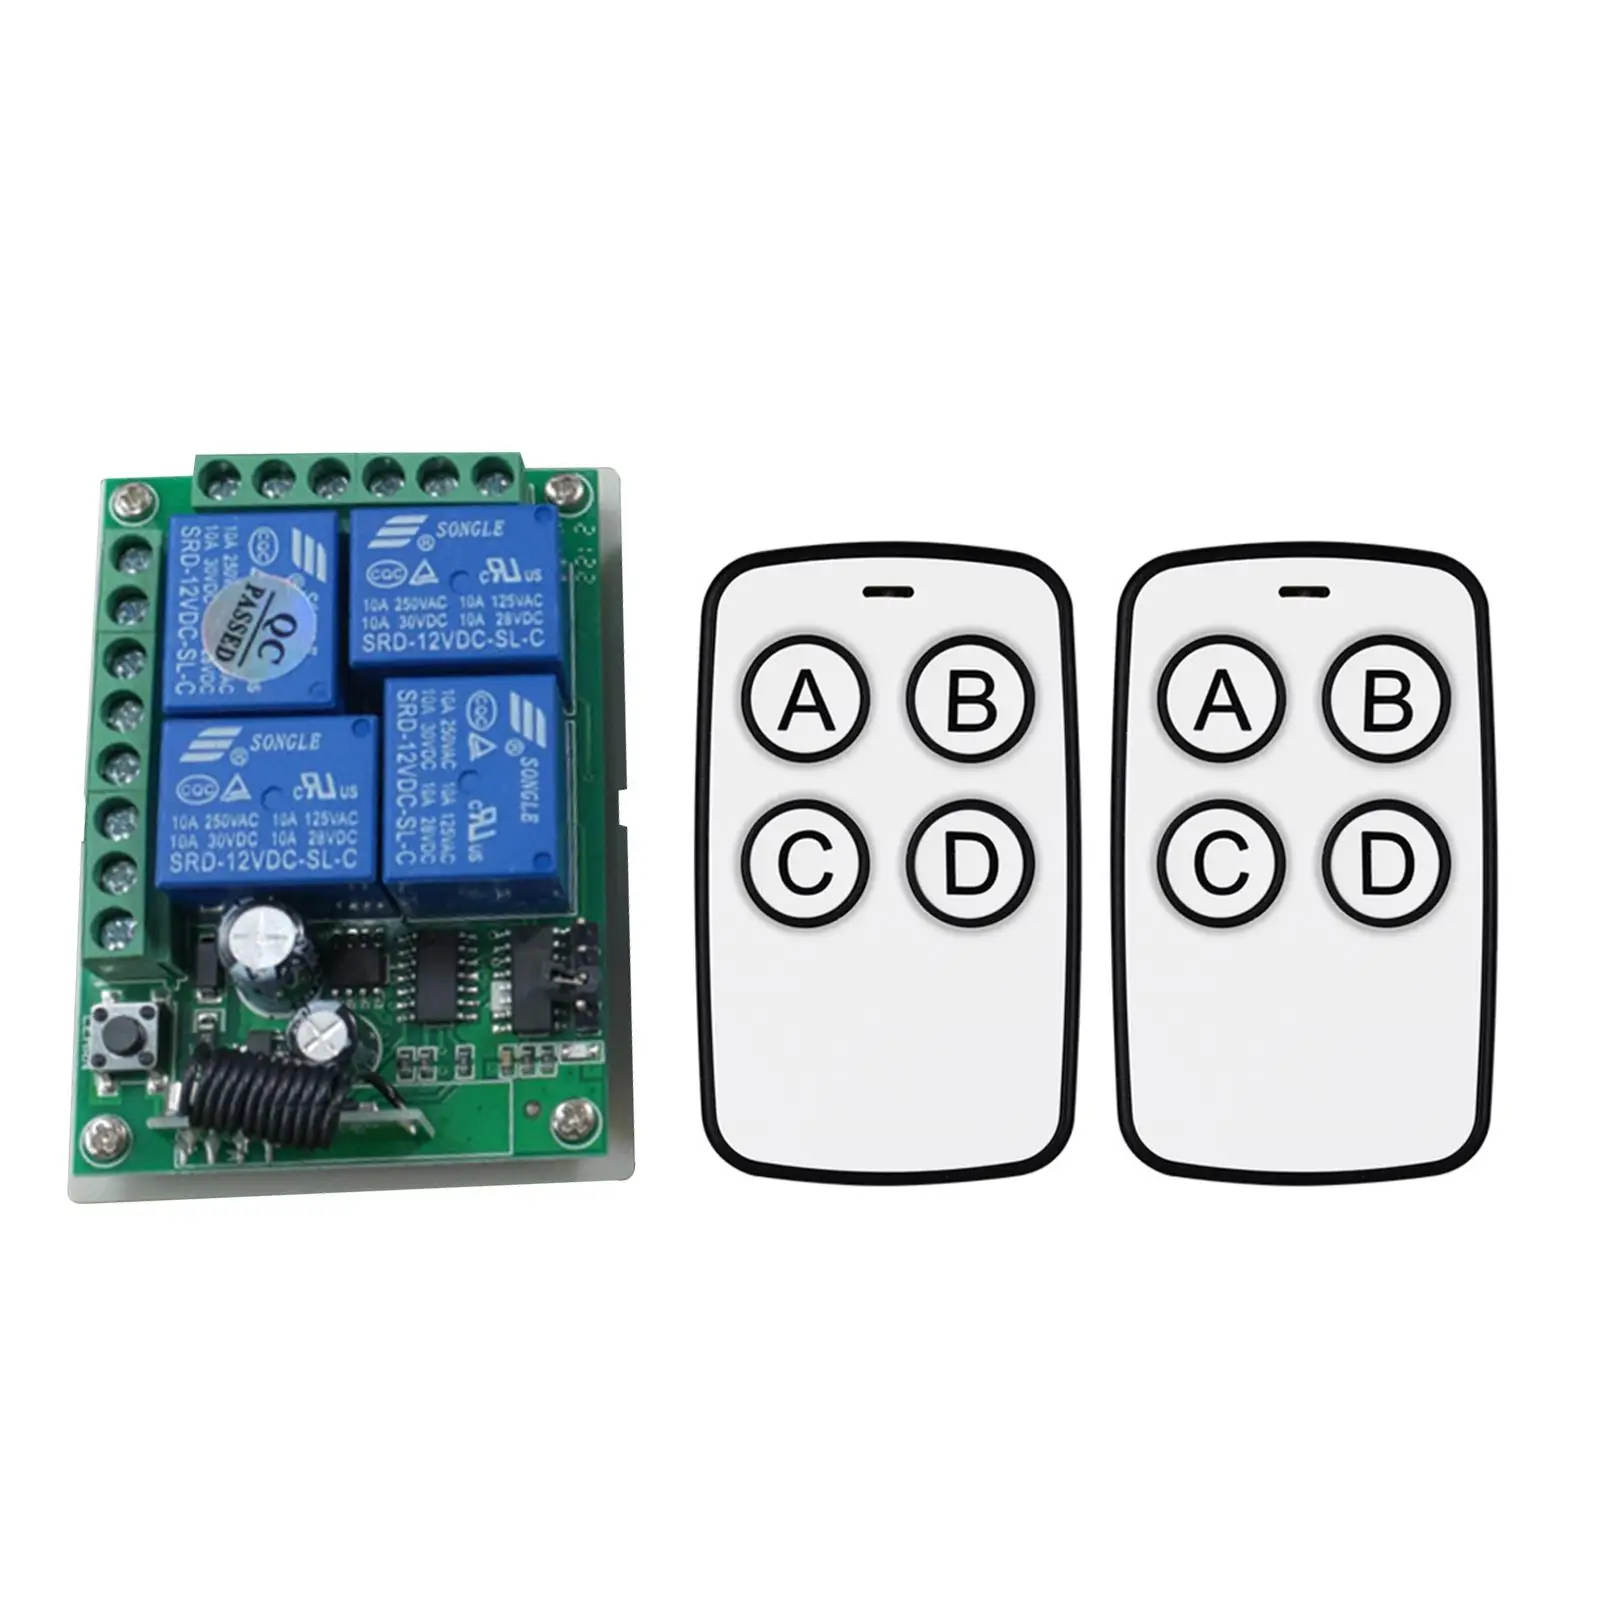 Controller Switch 4 Remote Control Switch for Lights Cars Truck Tailgate